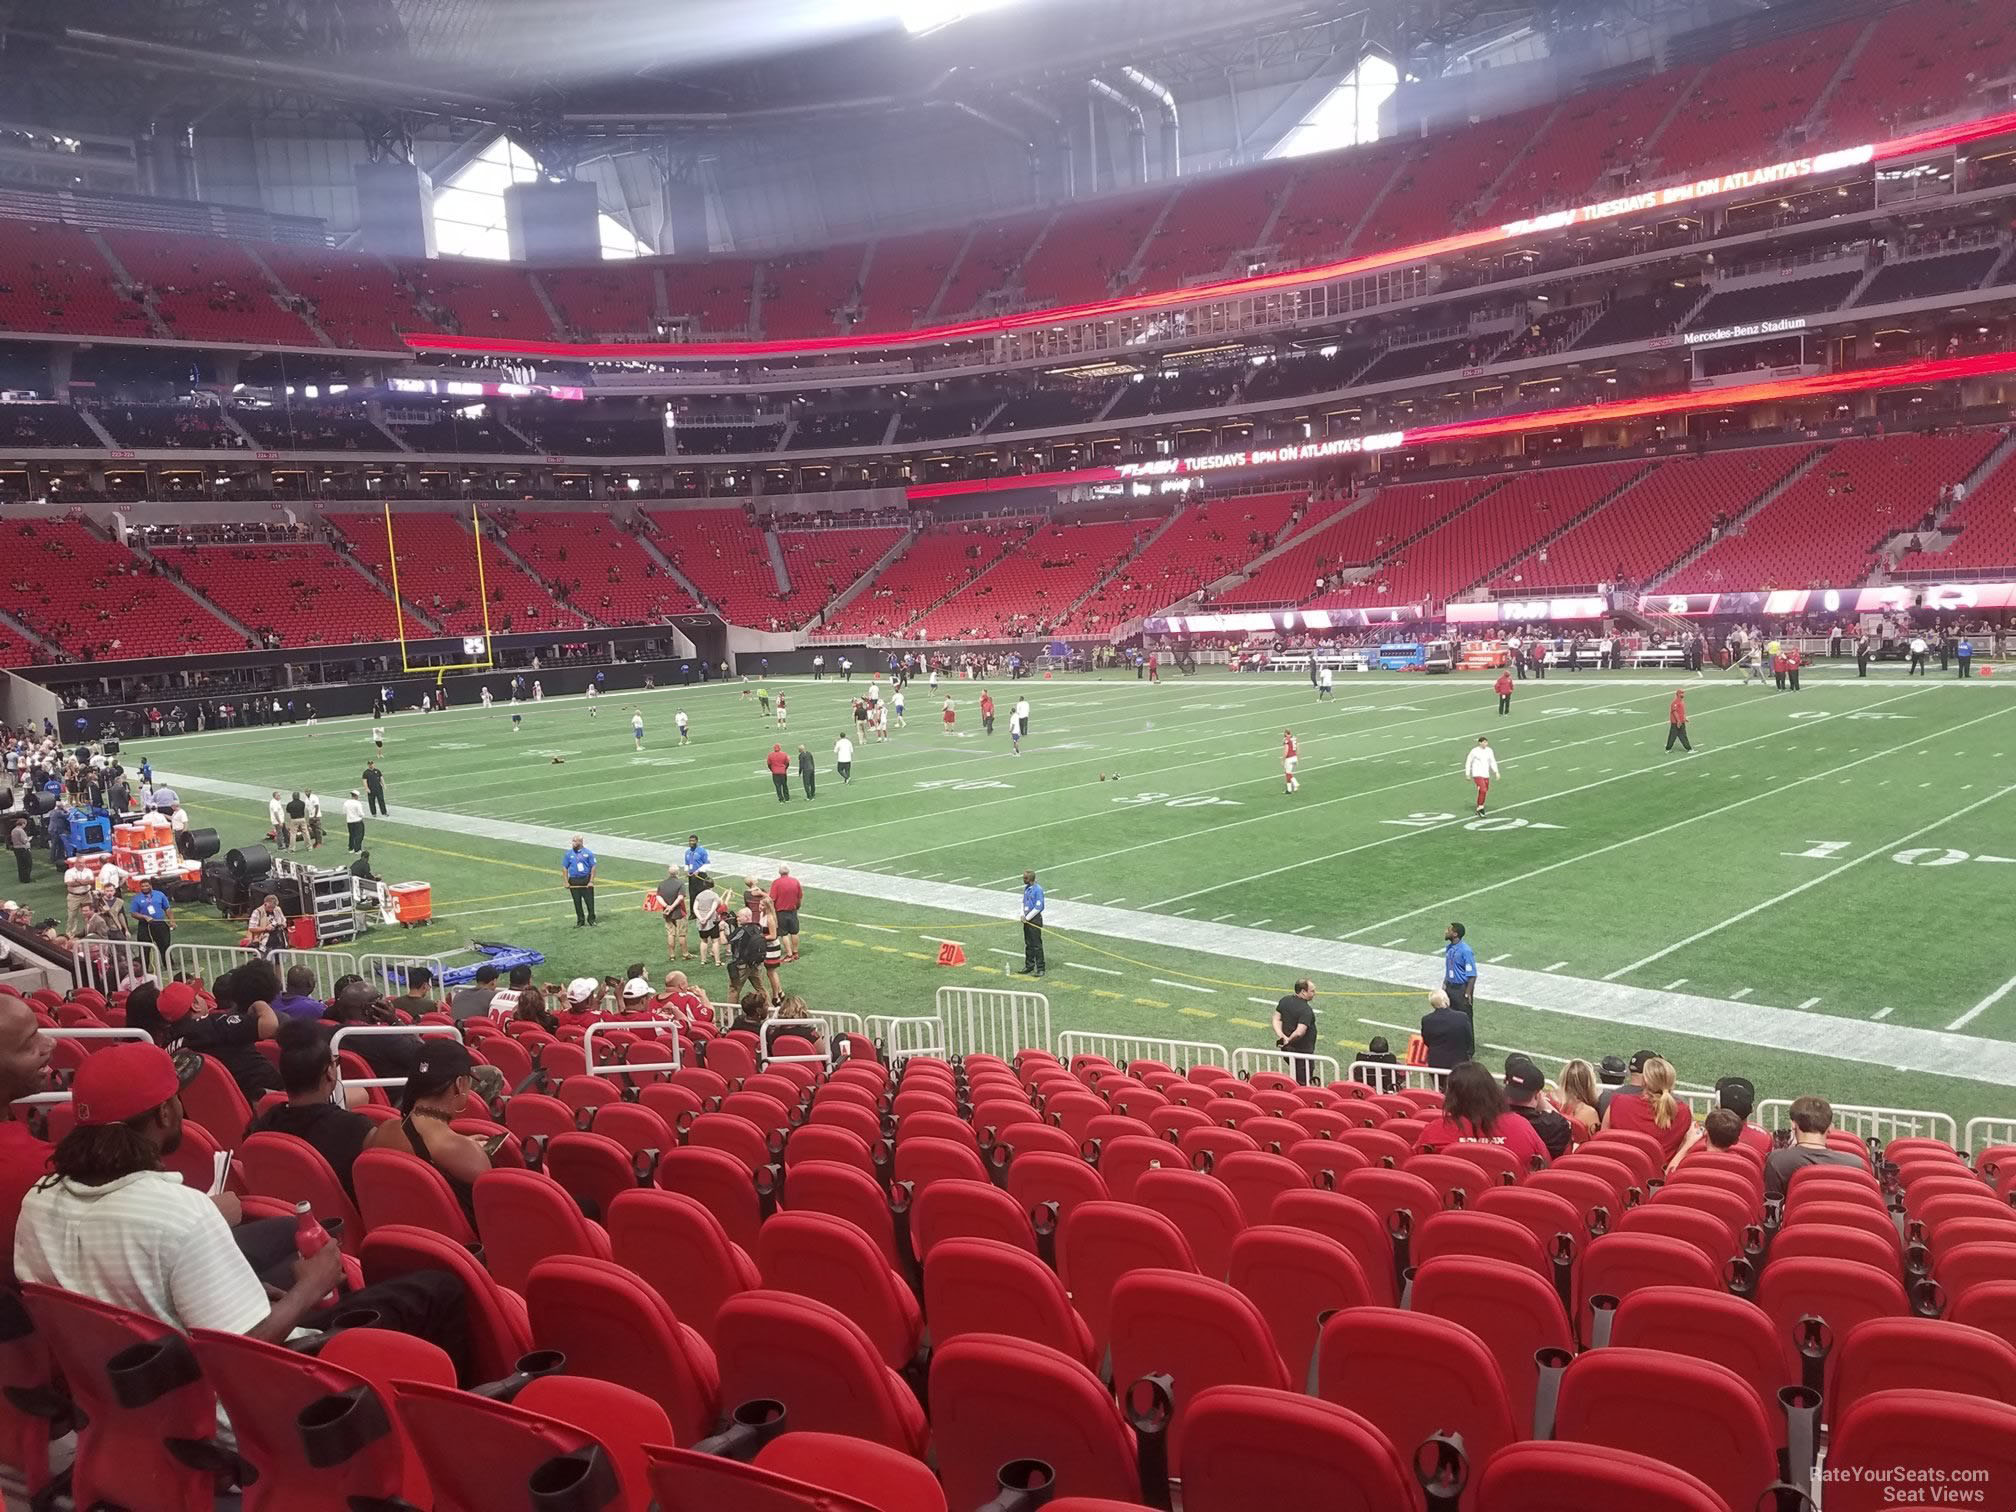 section 104, row 14 seat view  for football - mercedes-benz stadium